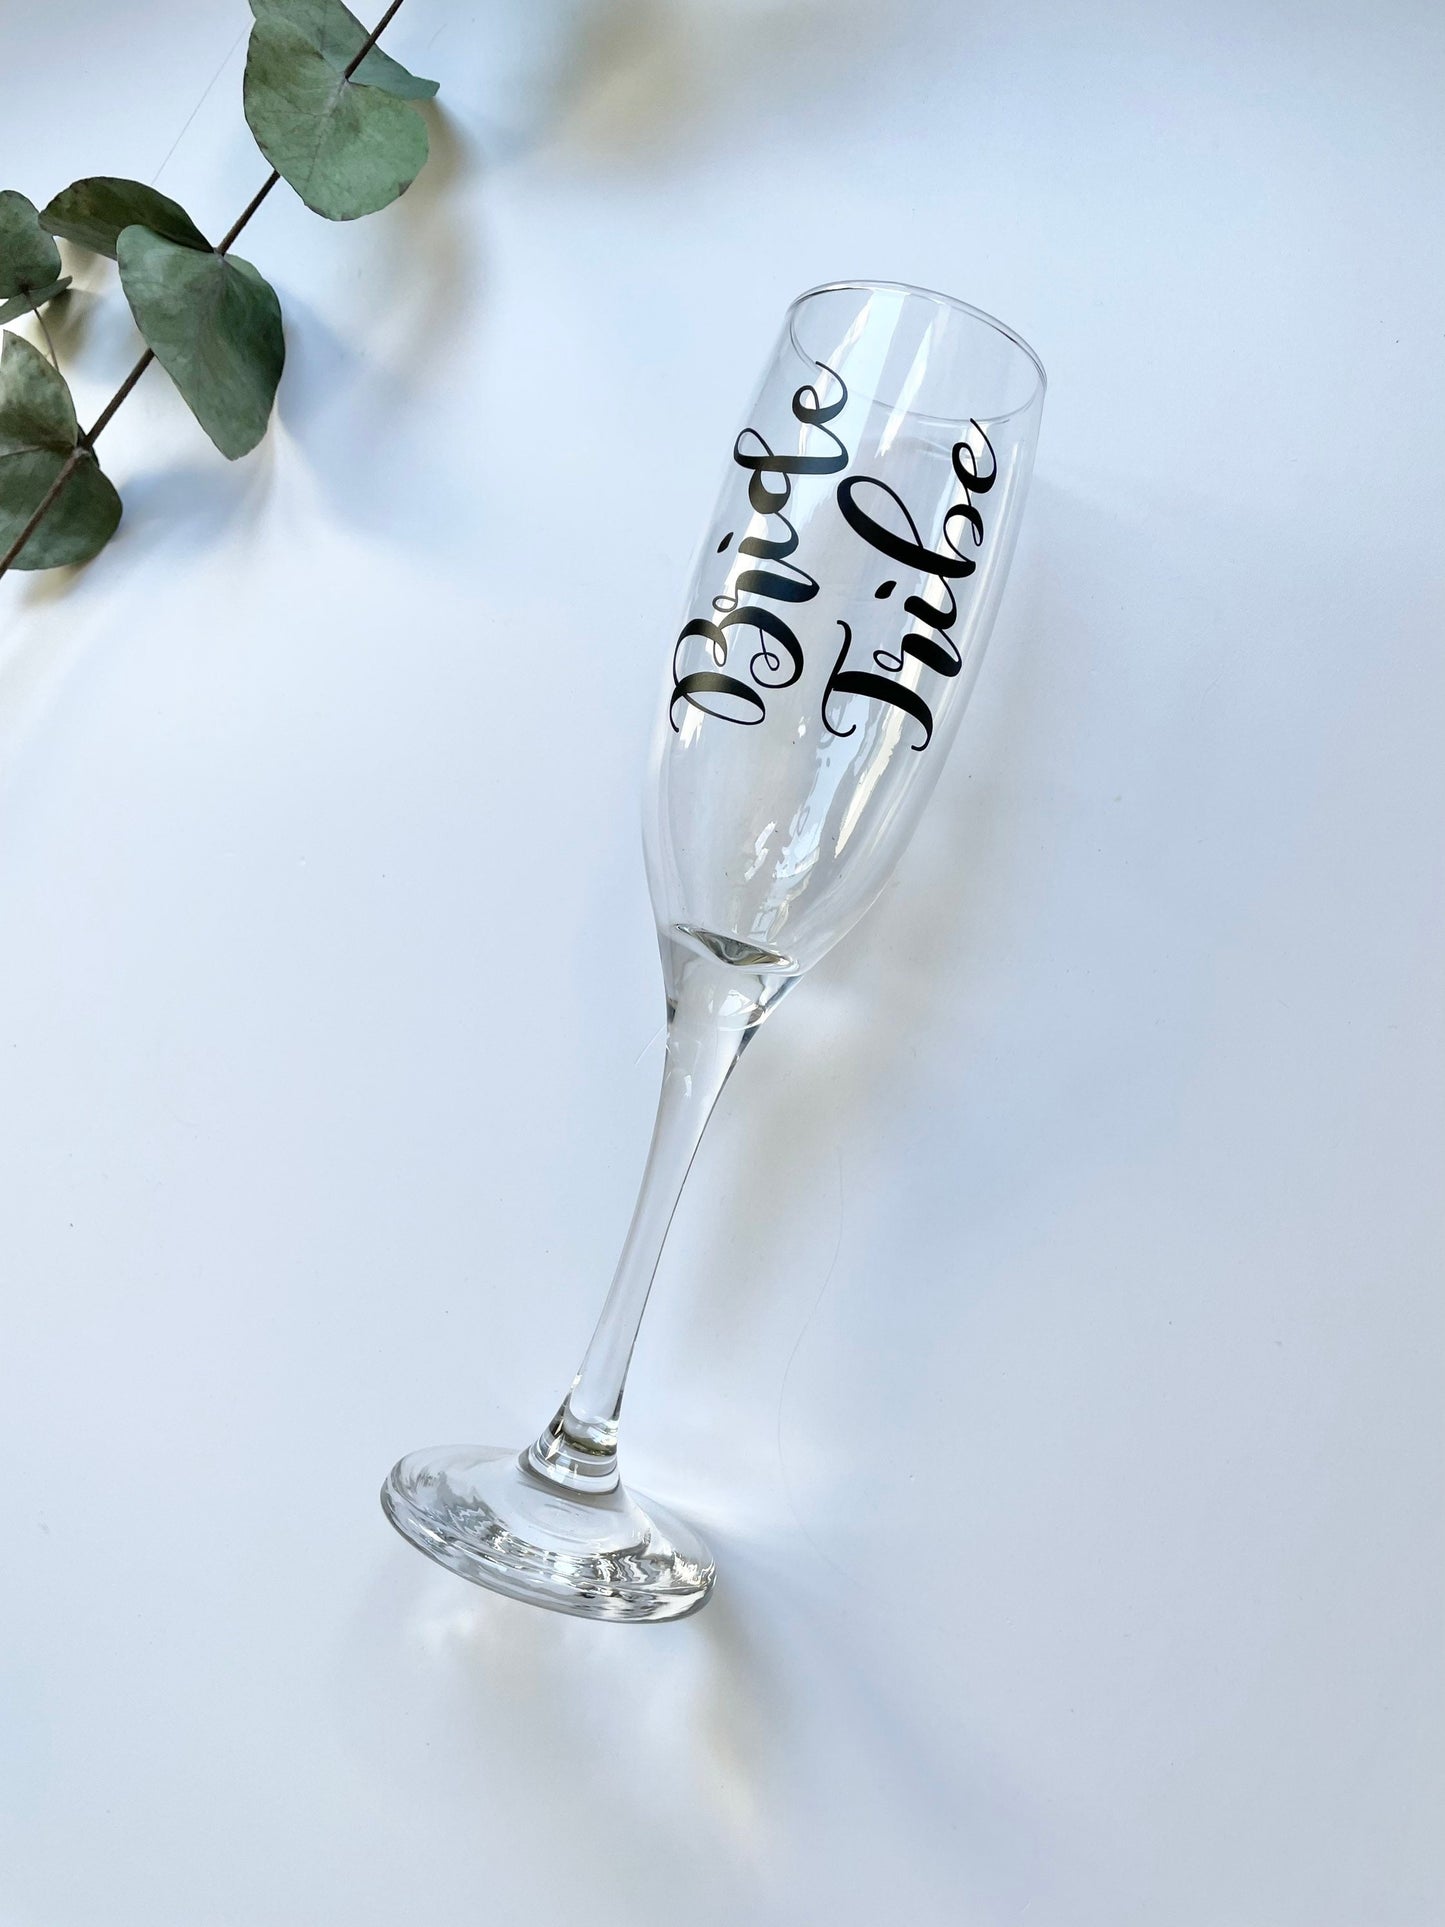 Champagne flute, bridesmaid proposal, personalised champagne flutes, prosecco gift, bride tribe gifts, bridal party gifts, bridesmaid gift